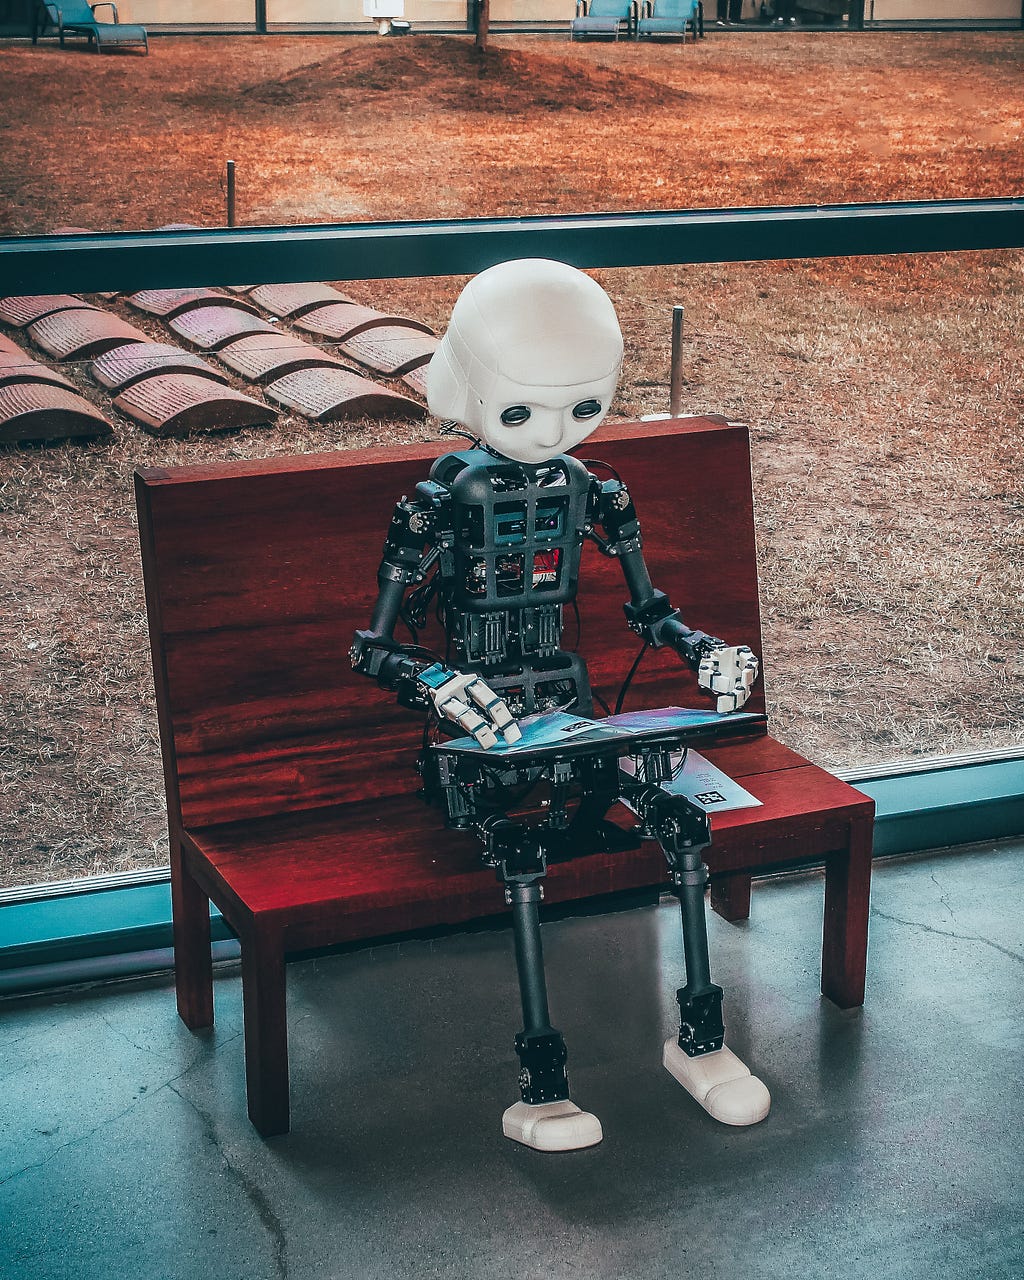 Image showing a humanoid robot reading